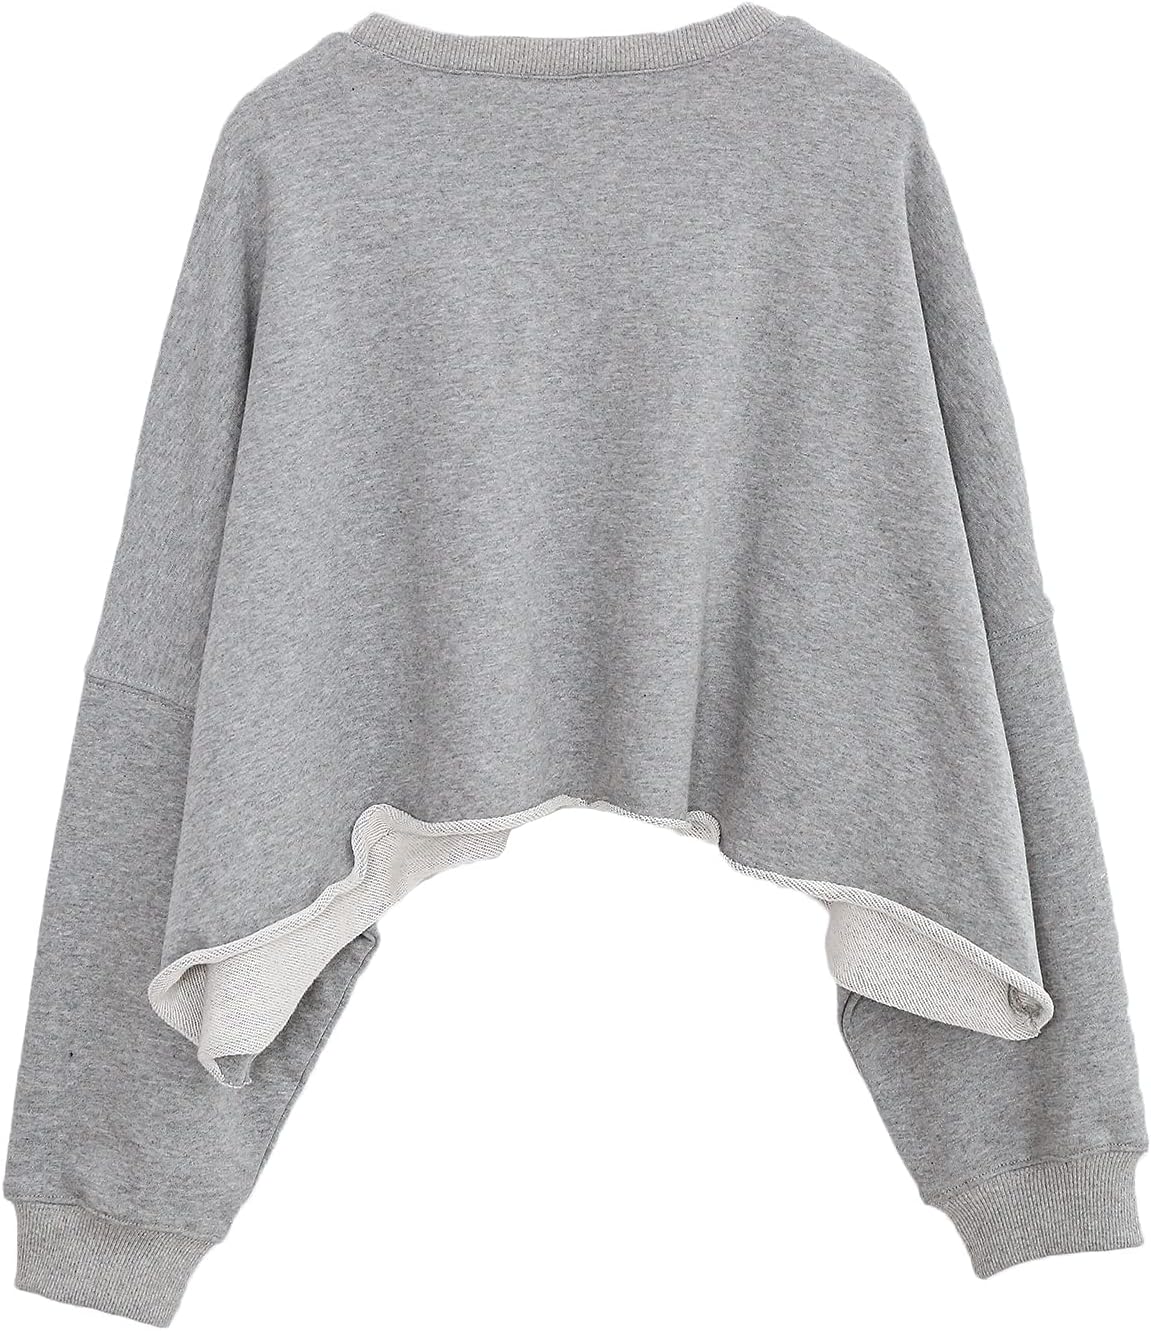 NTG Fad Cropped Hoodie Pullover Crewneck Crop Tops Oversize Fit